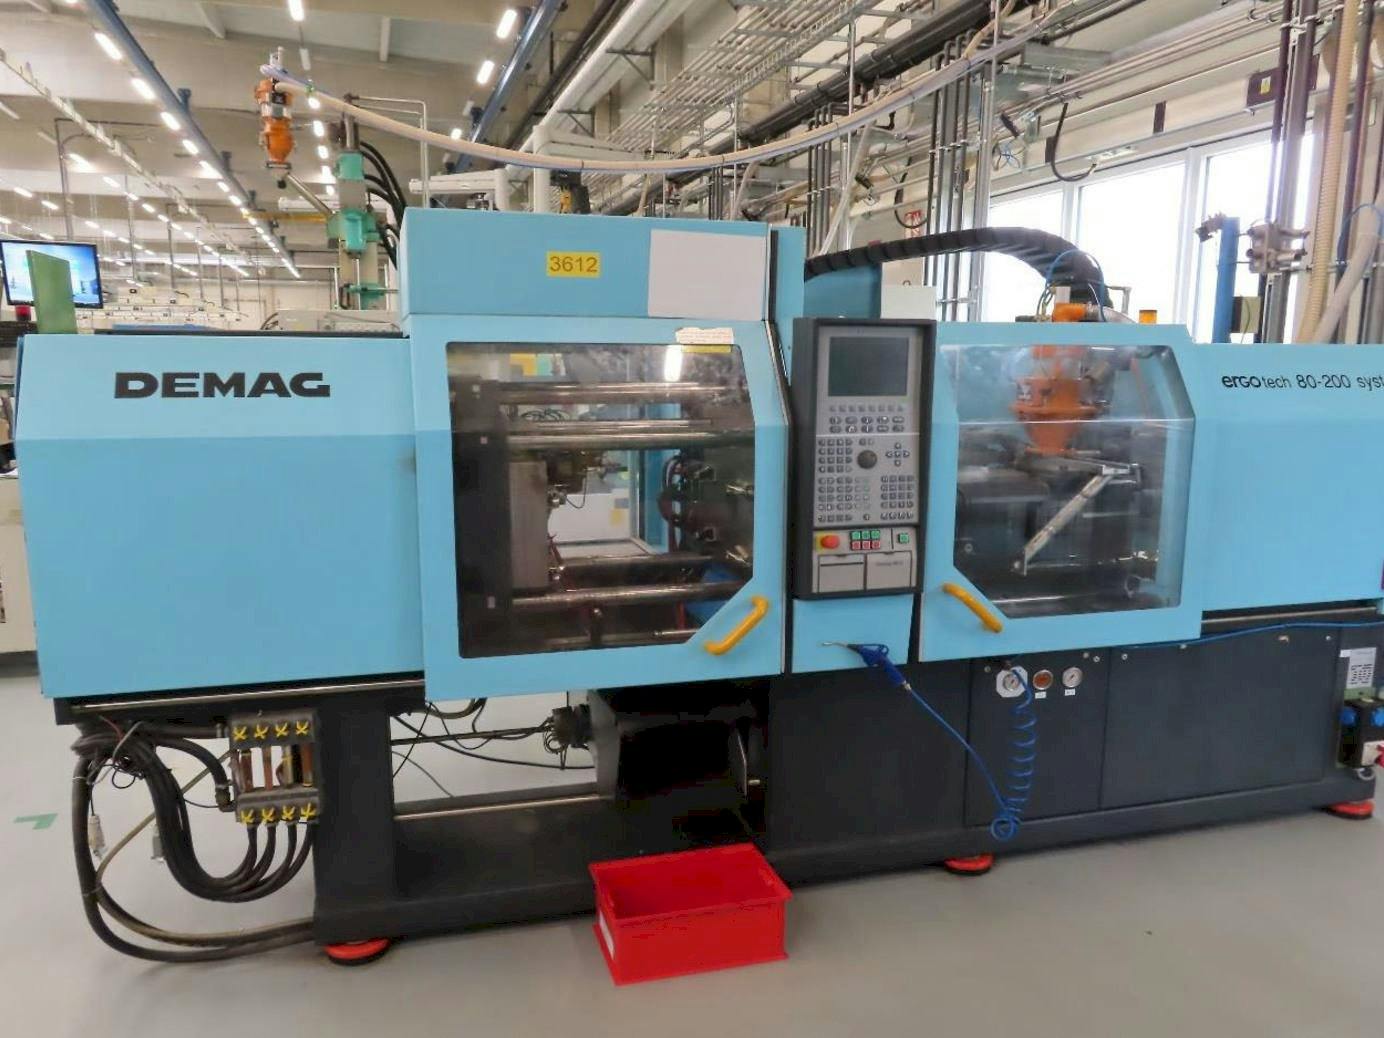 Front view of DEMAG Ergotech 80-200 System  machine